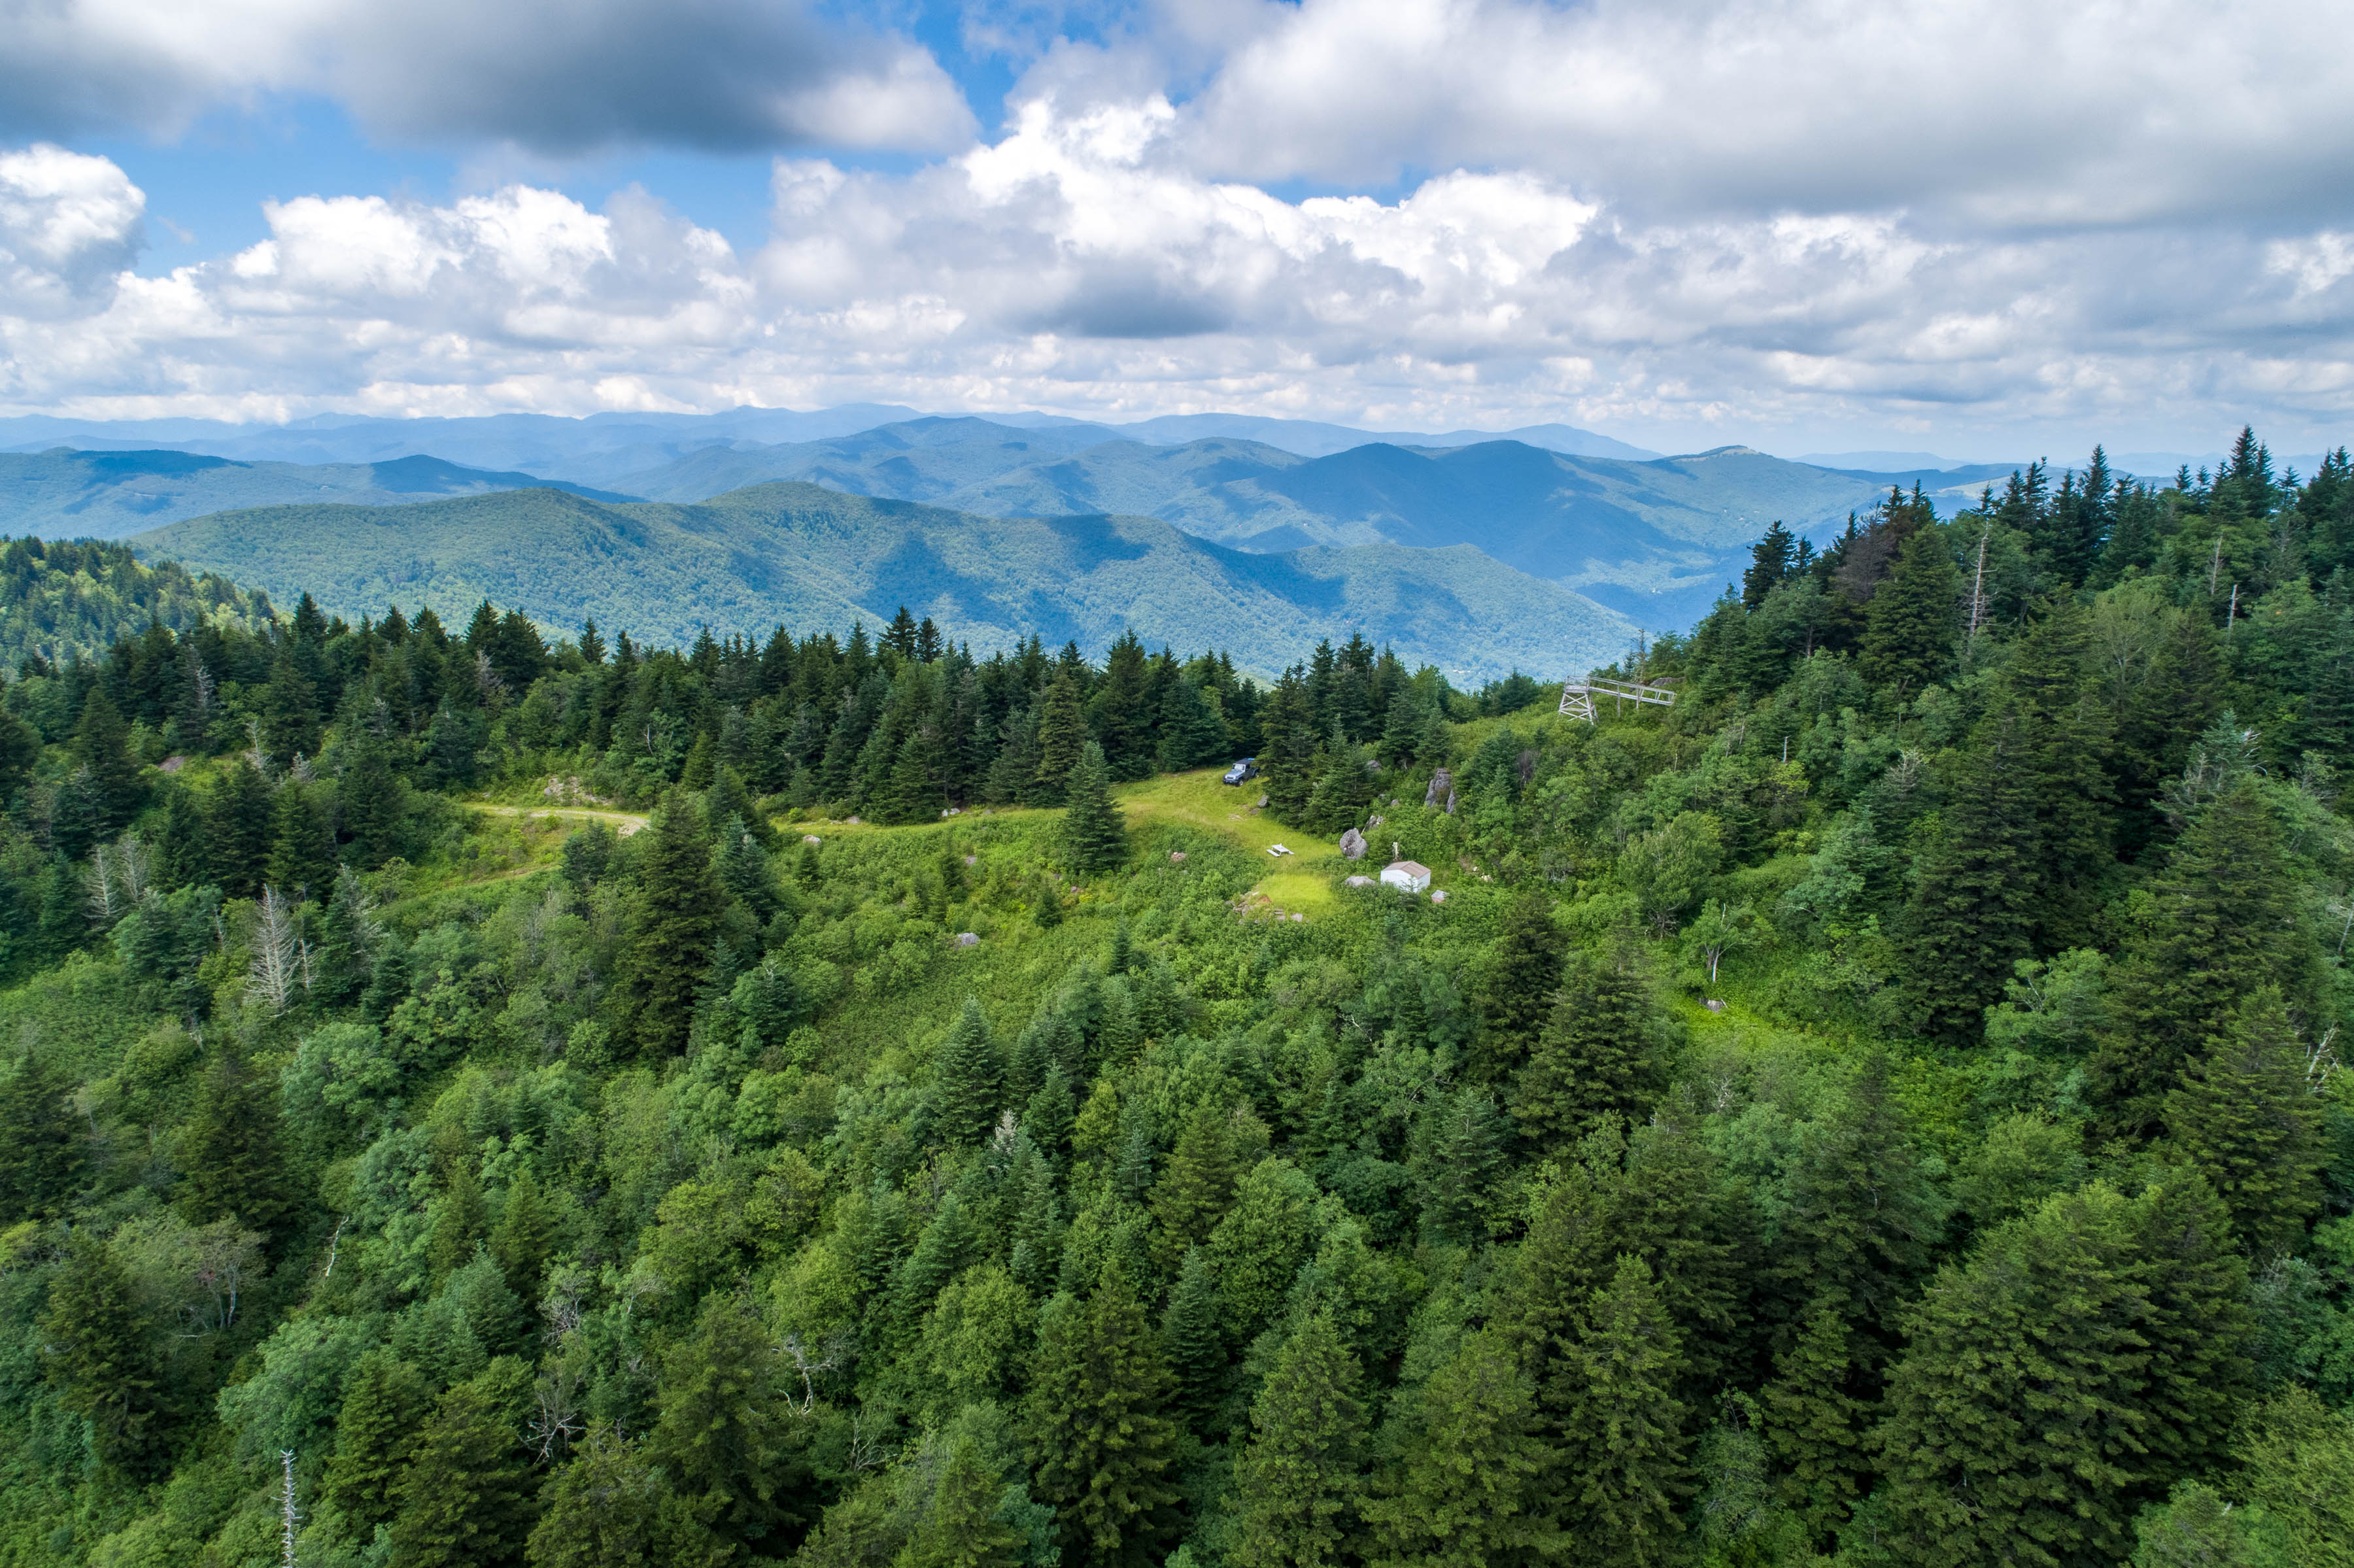 Enjoy stunning views perched above the clouds from the highest elevation private lot in the Blue Ridge Mountains, with a top elevation of 6130 ft.